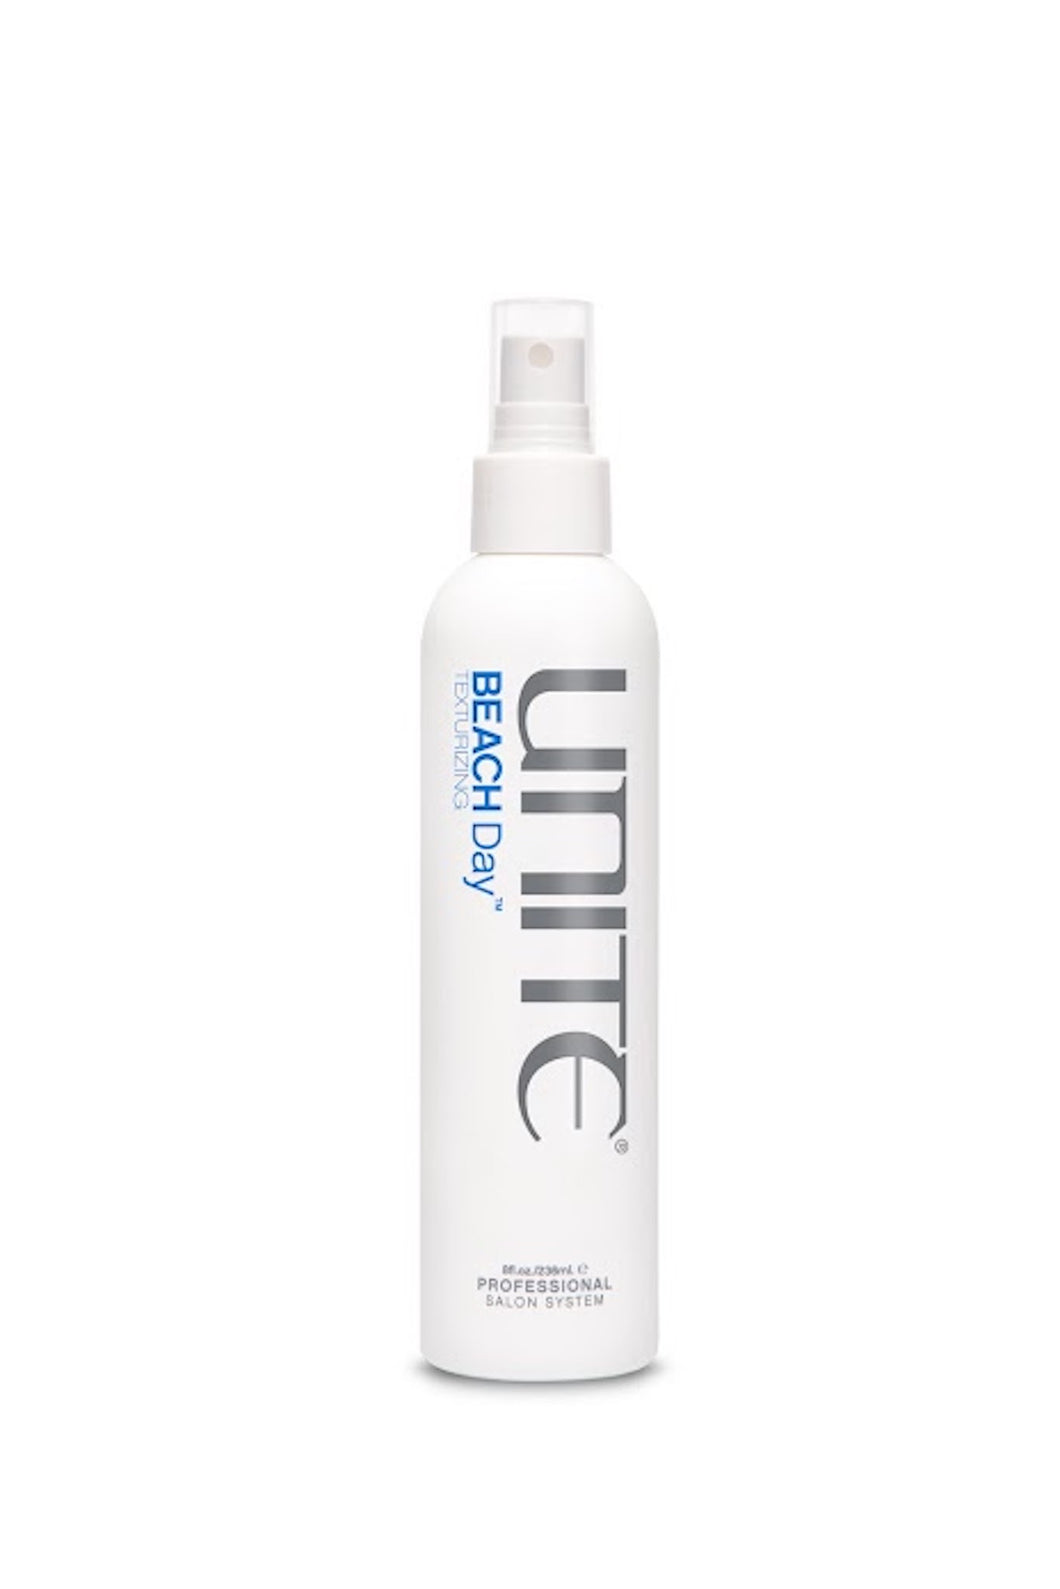 Unite - BEACH DAY white bottle non-aerosol spray top and clear lid.